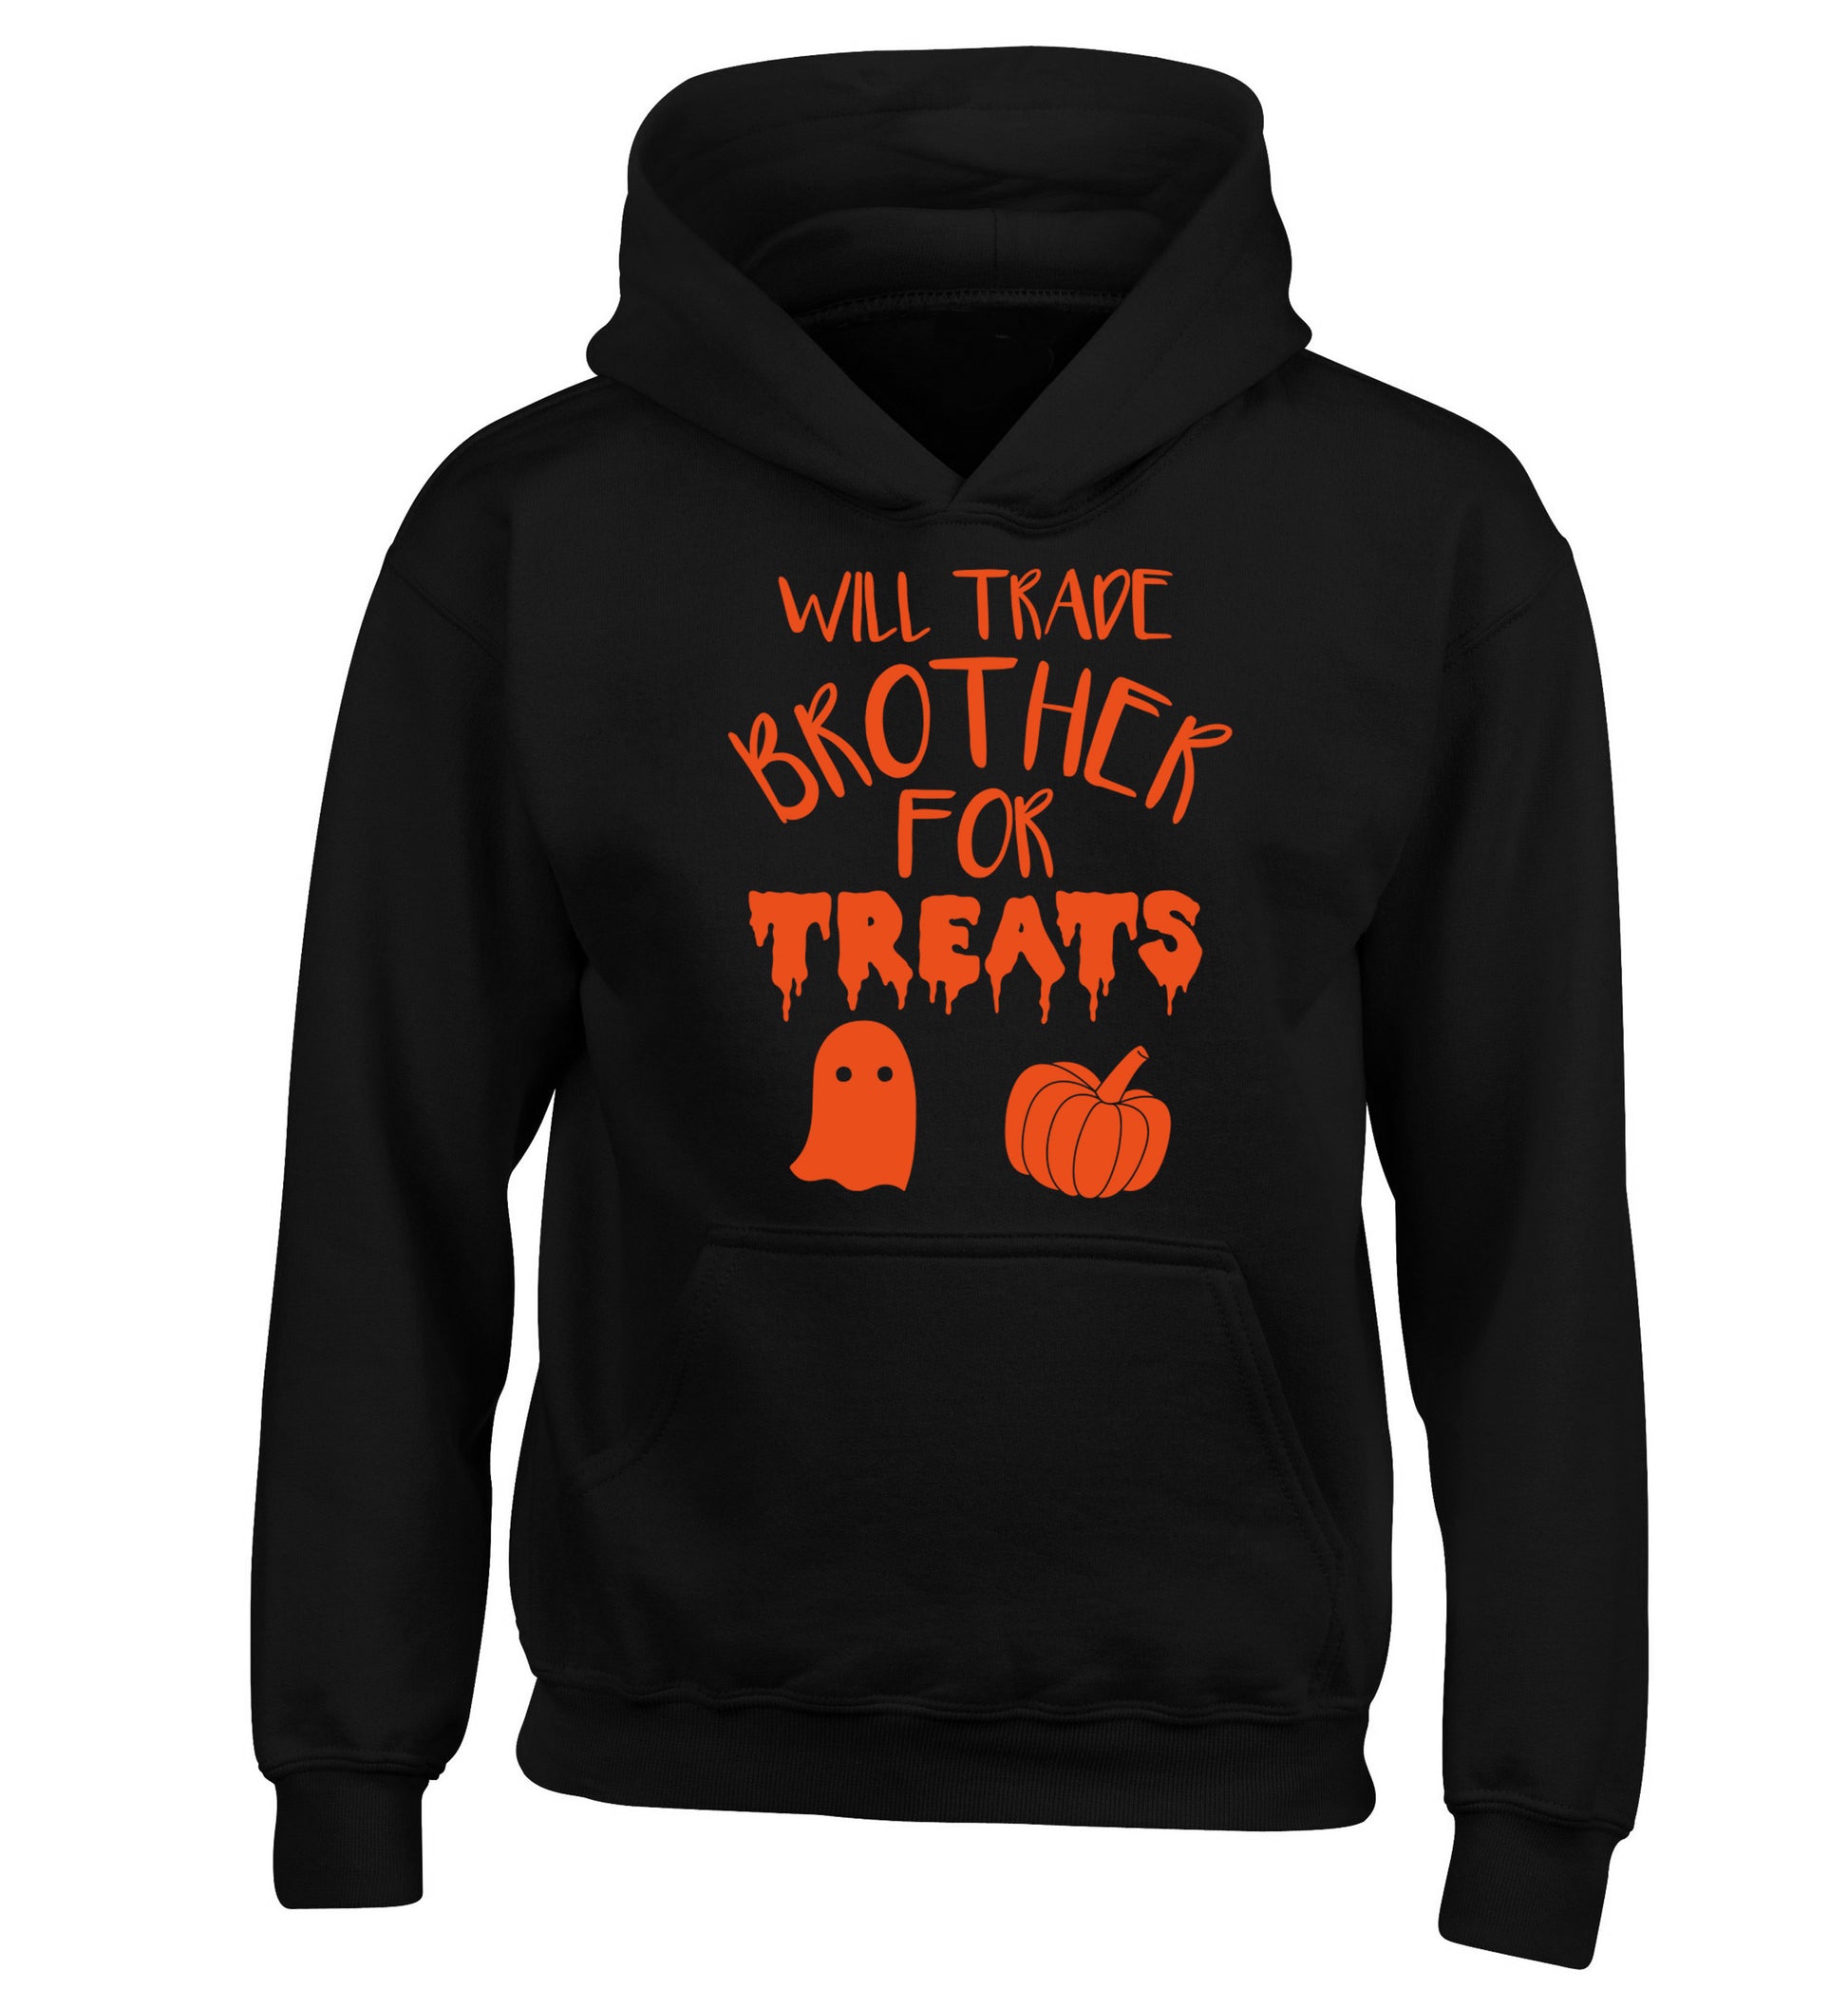 Will trade brother for treats children's black hoodie 12-14 Years